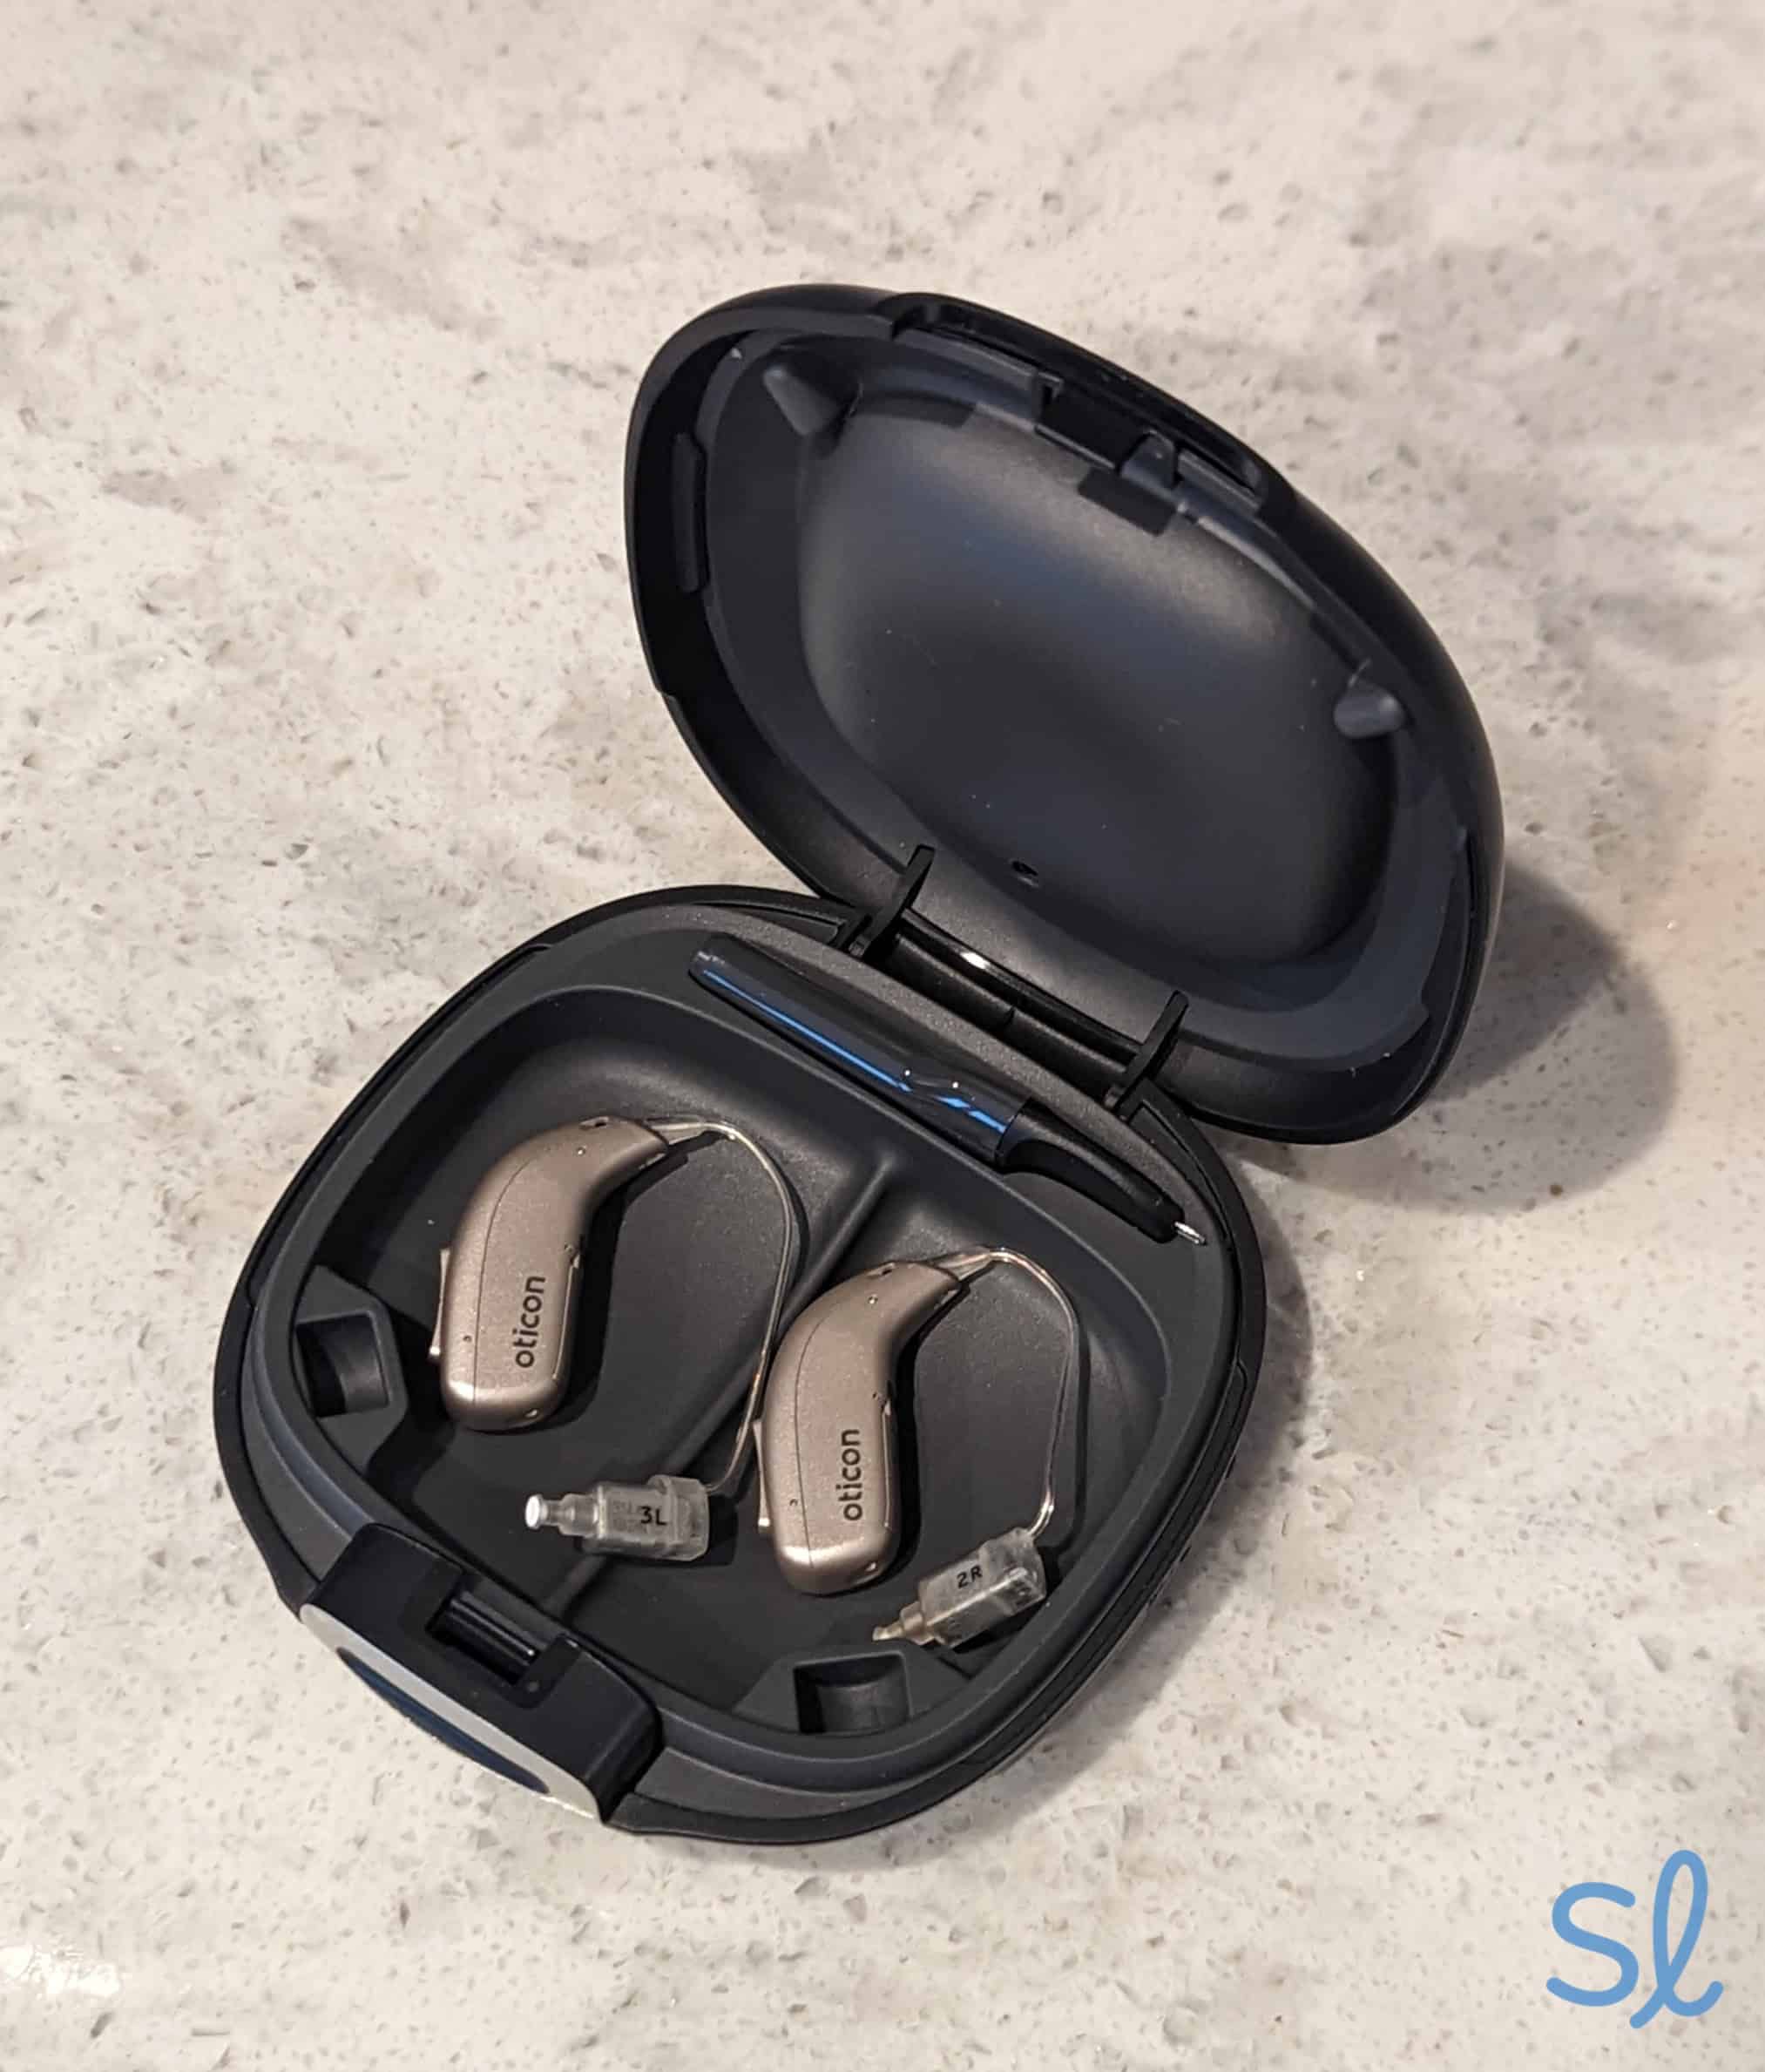 Testing out Oticon hearing aids